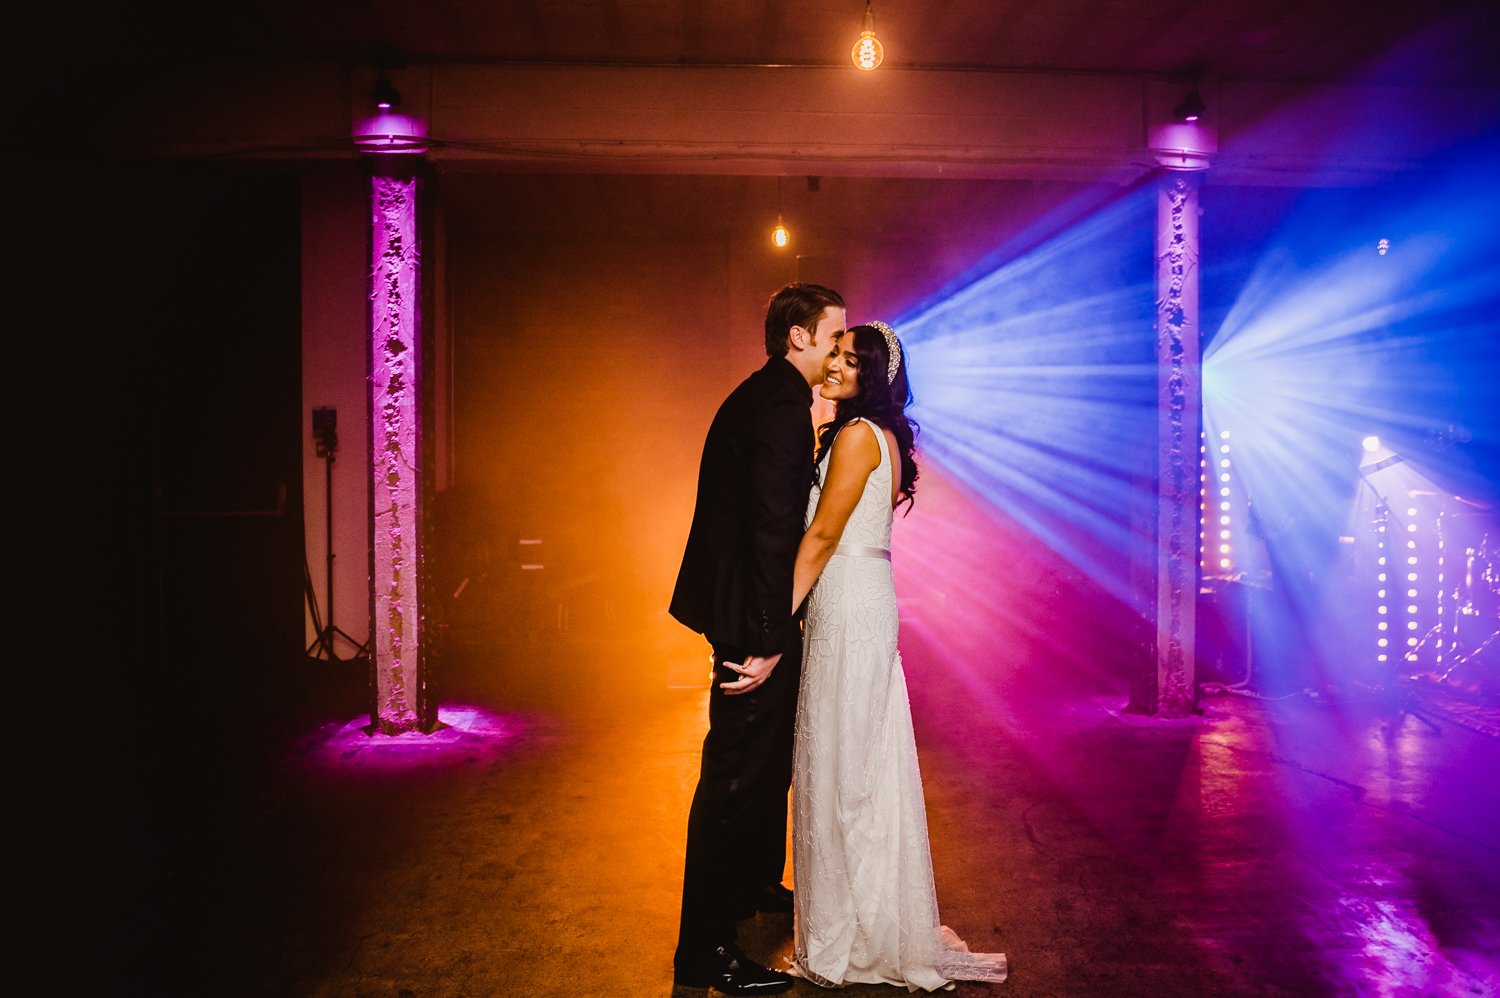  Photographer Credit: Kate McCarthy  In a beautifully lit room within the Victoria Warehouse the bride and groom are stood close together with the groom’s face behind the bride’s as he is whispering in her ear. The large room is empty except for the 